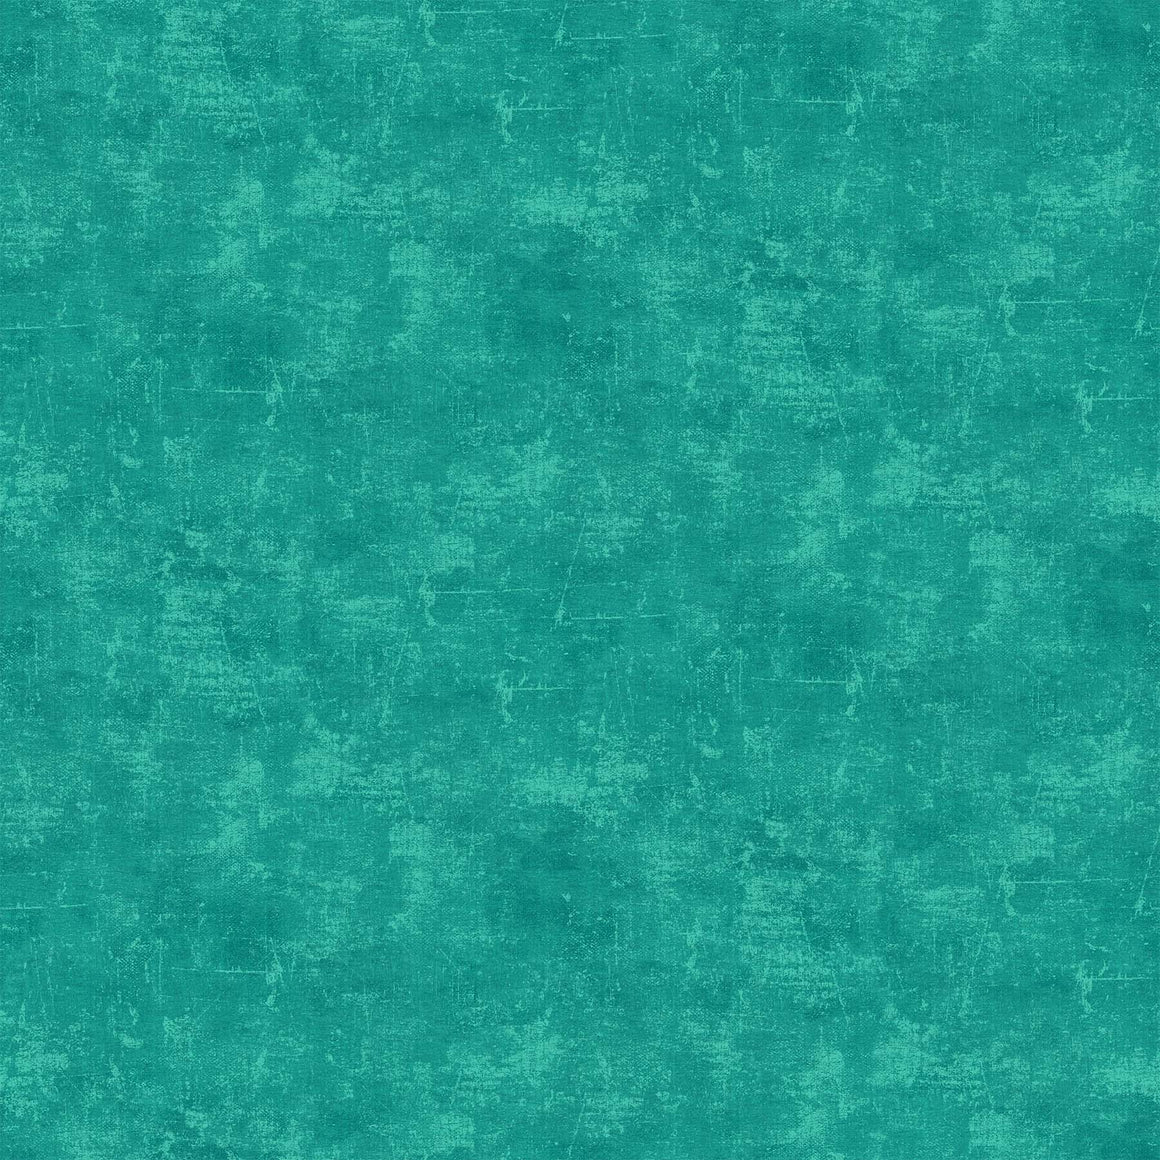 Agean Sea - Canvas Texture - 9030-63, Designer Fabric, Northcott, [variant_title] - Mad About Patchwork